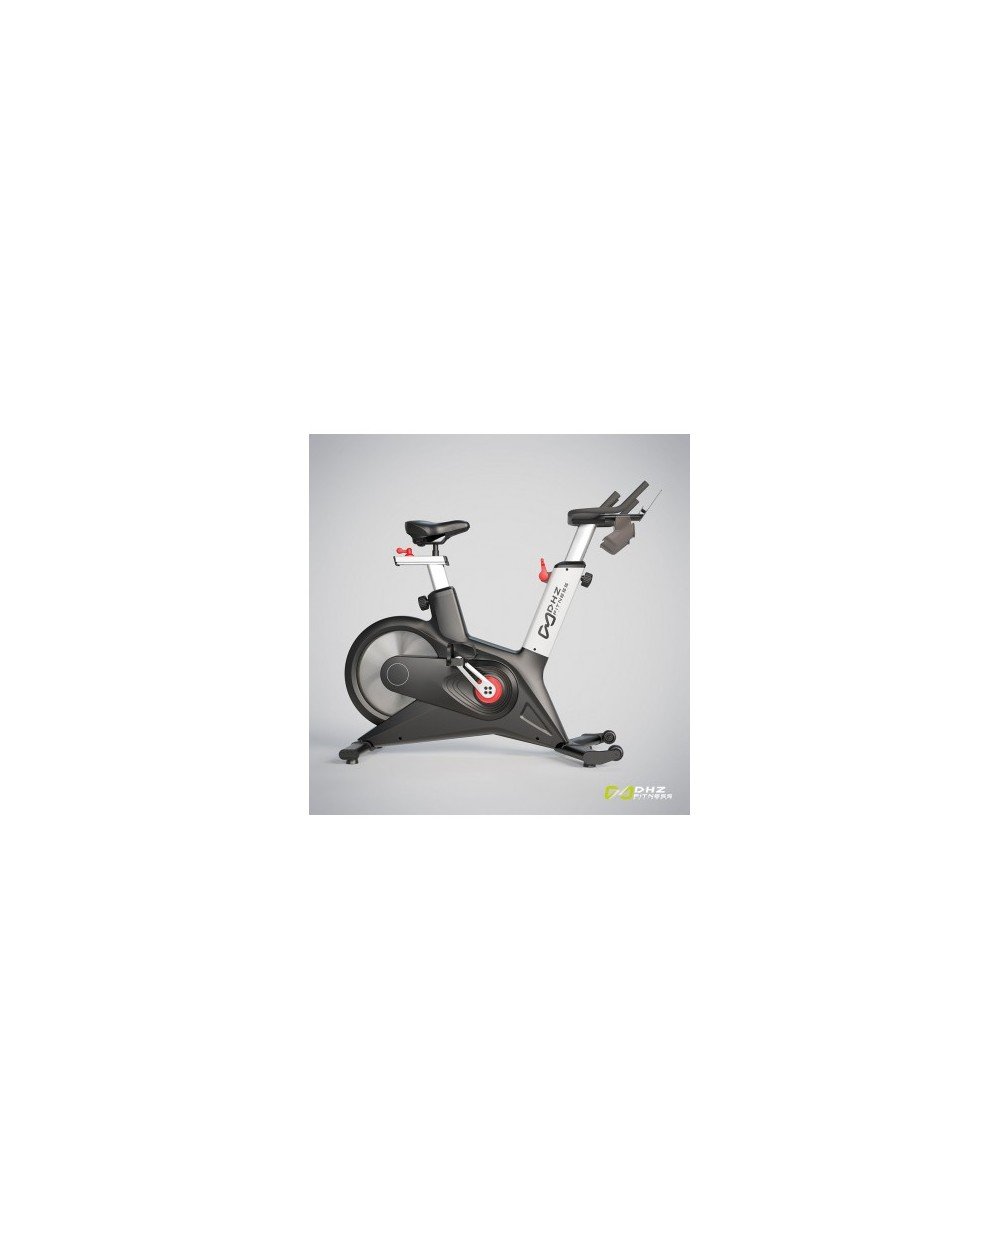 Bicicleta Spinning Profesional Magnética DHZ S300